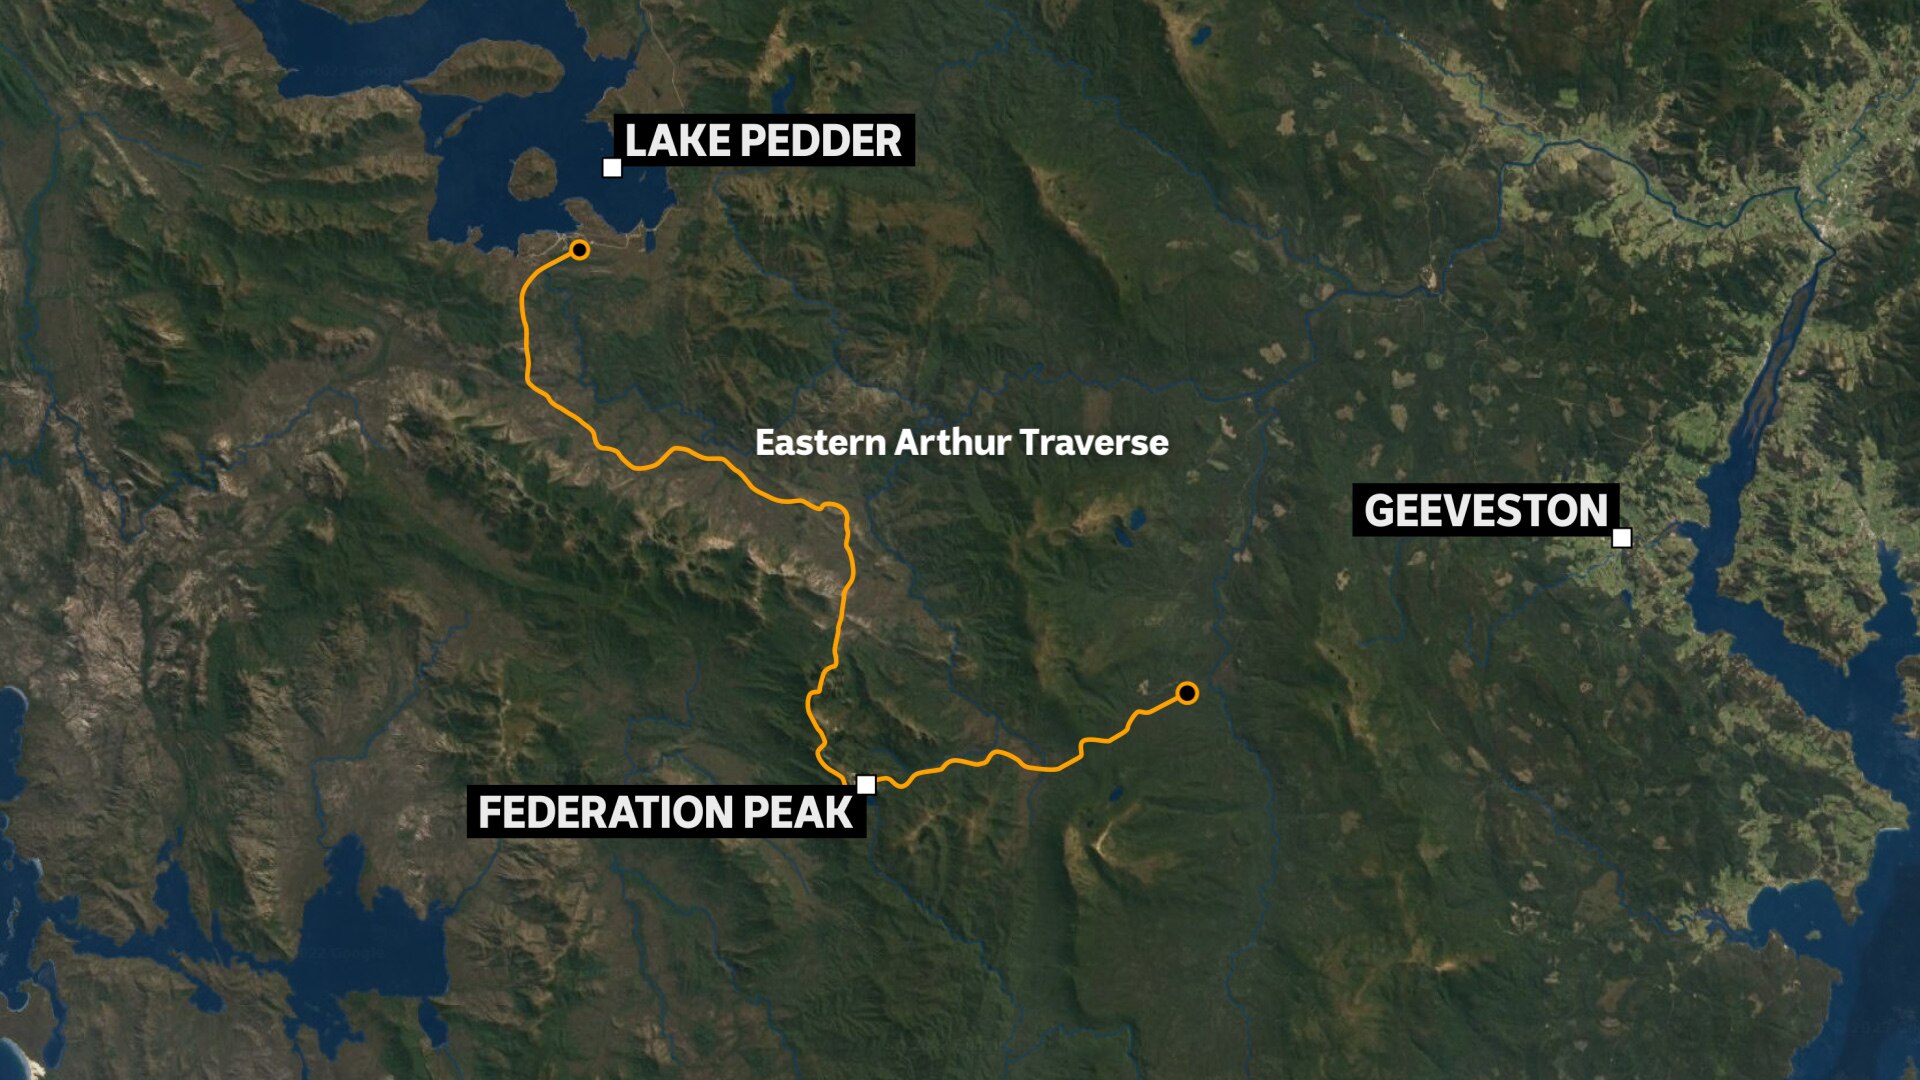 Map of area where bushwalker went missing and later found deceased.